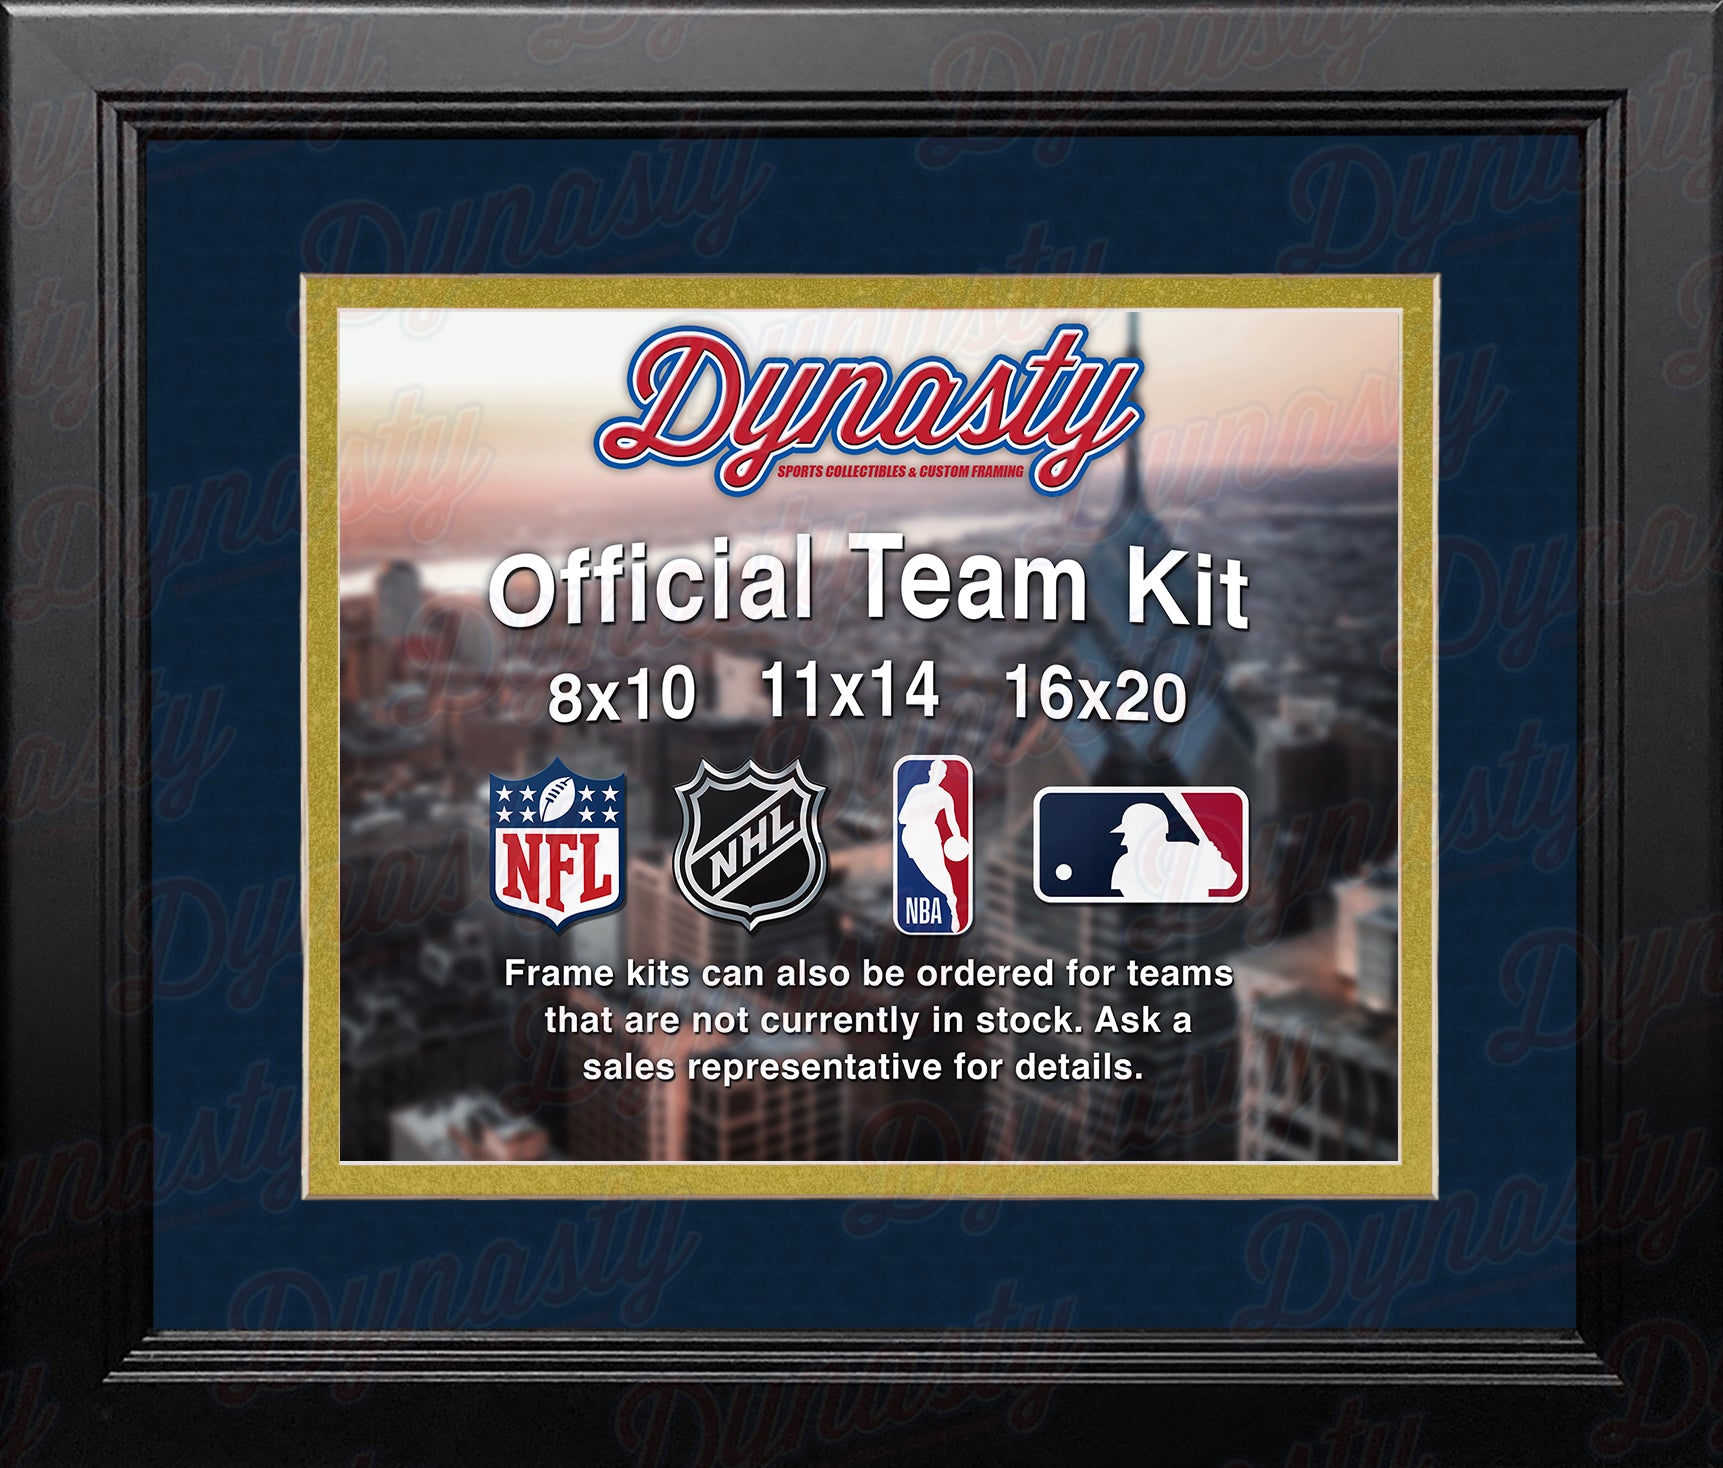 NFL Football Photo Picture Frame Kit - Los Angeles Rams (Navy Matting, Gold Trim) - Dynasty Sports & Framing 